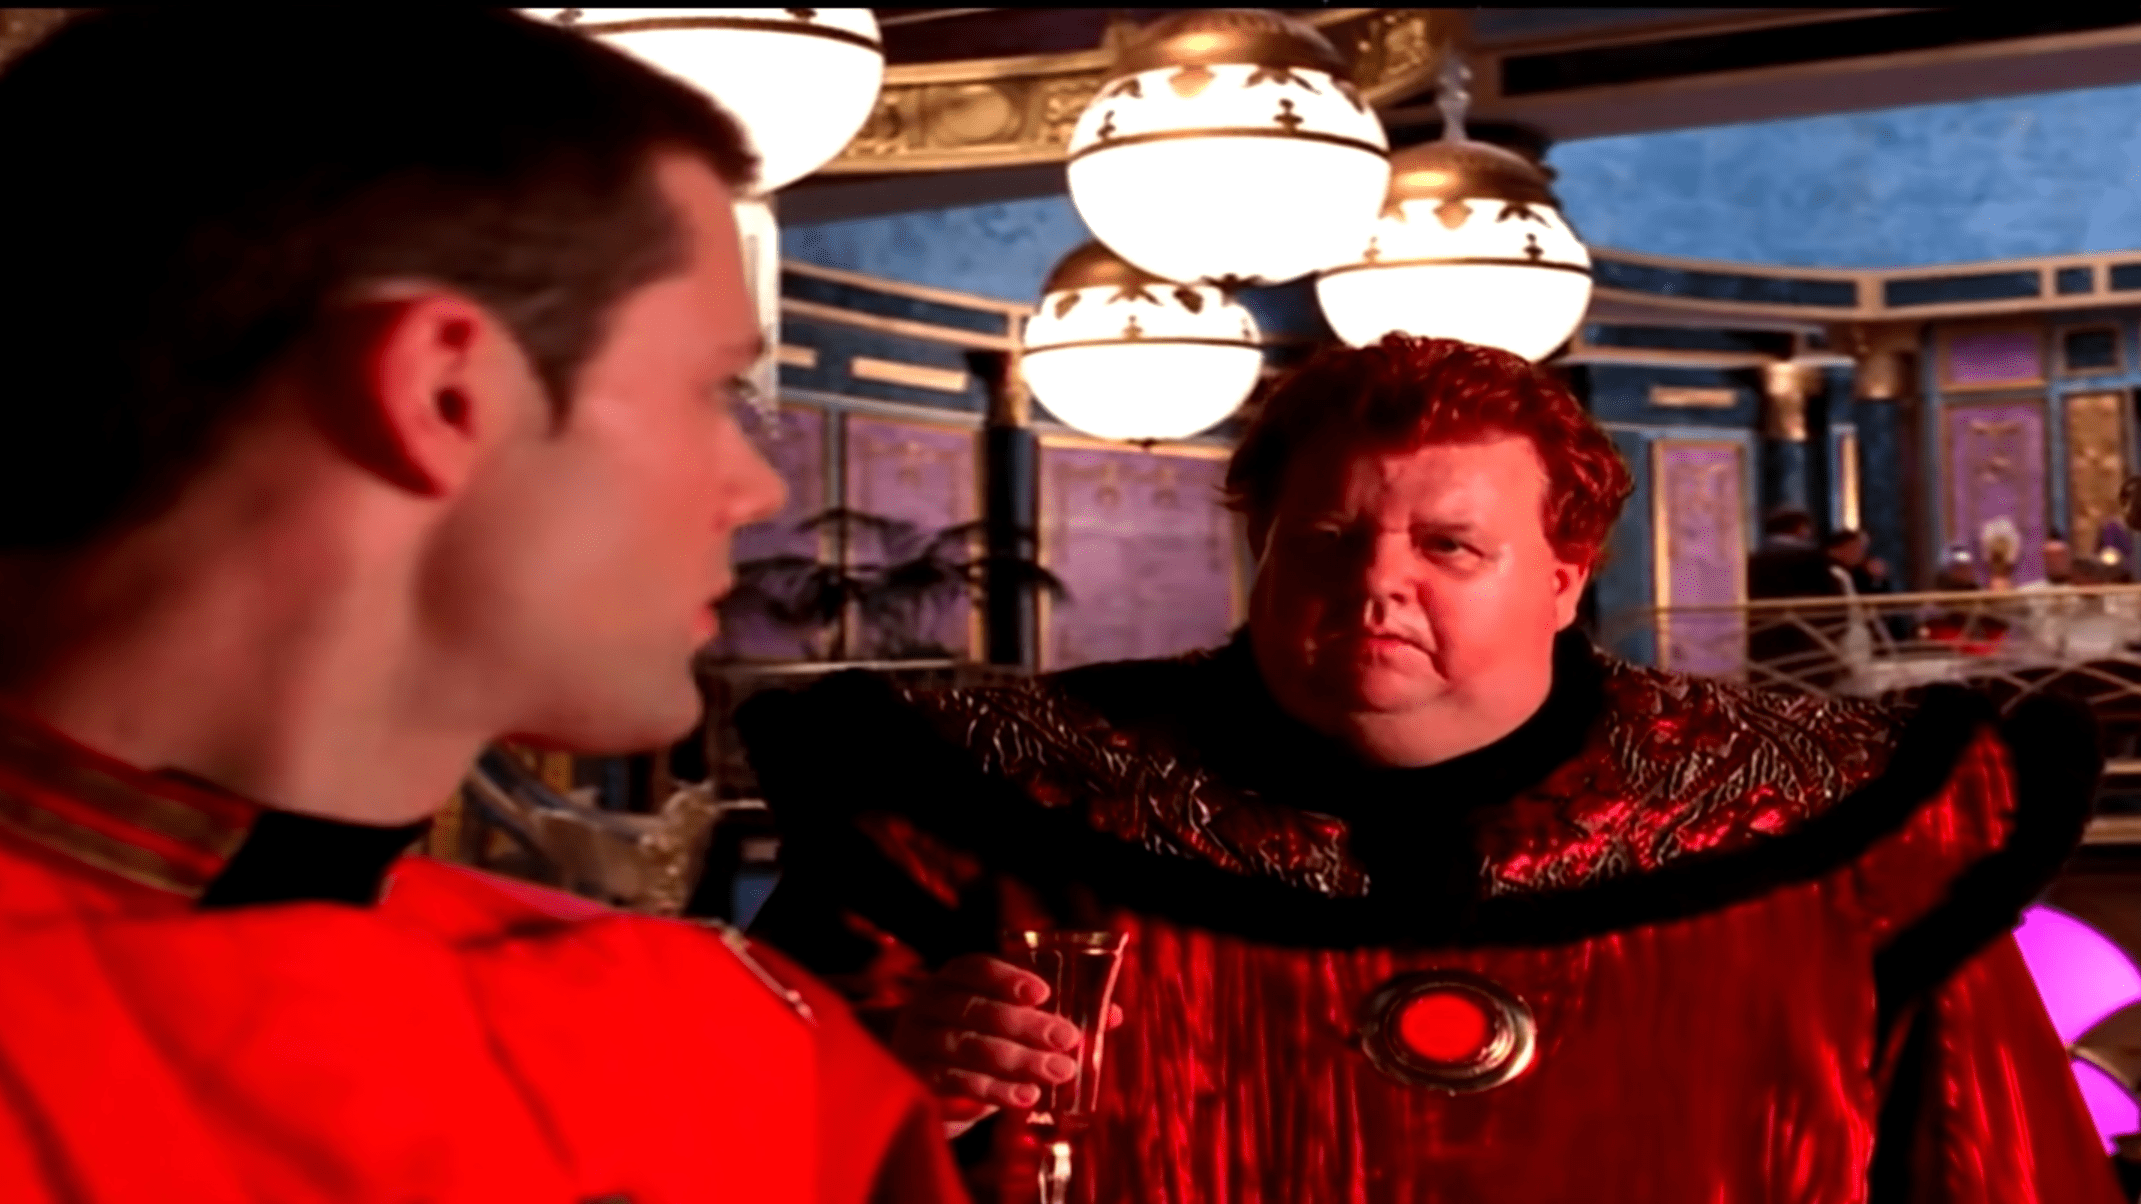 Baron Harkonnen (Ian McNeice) schemes for the throne with his nephew. (Image: Syfy)